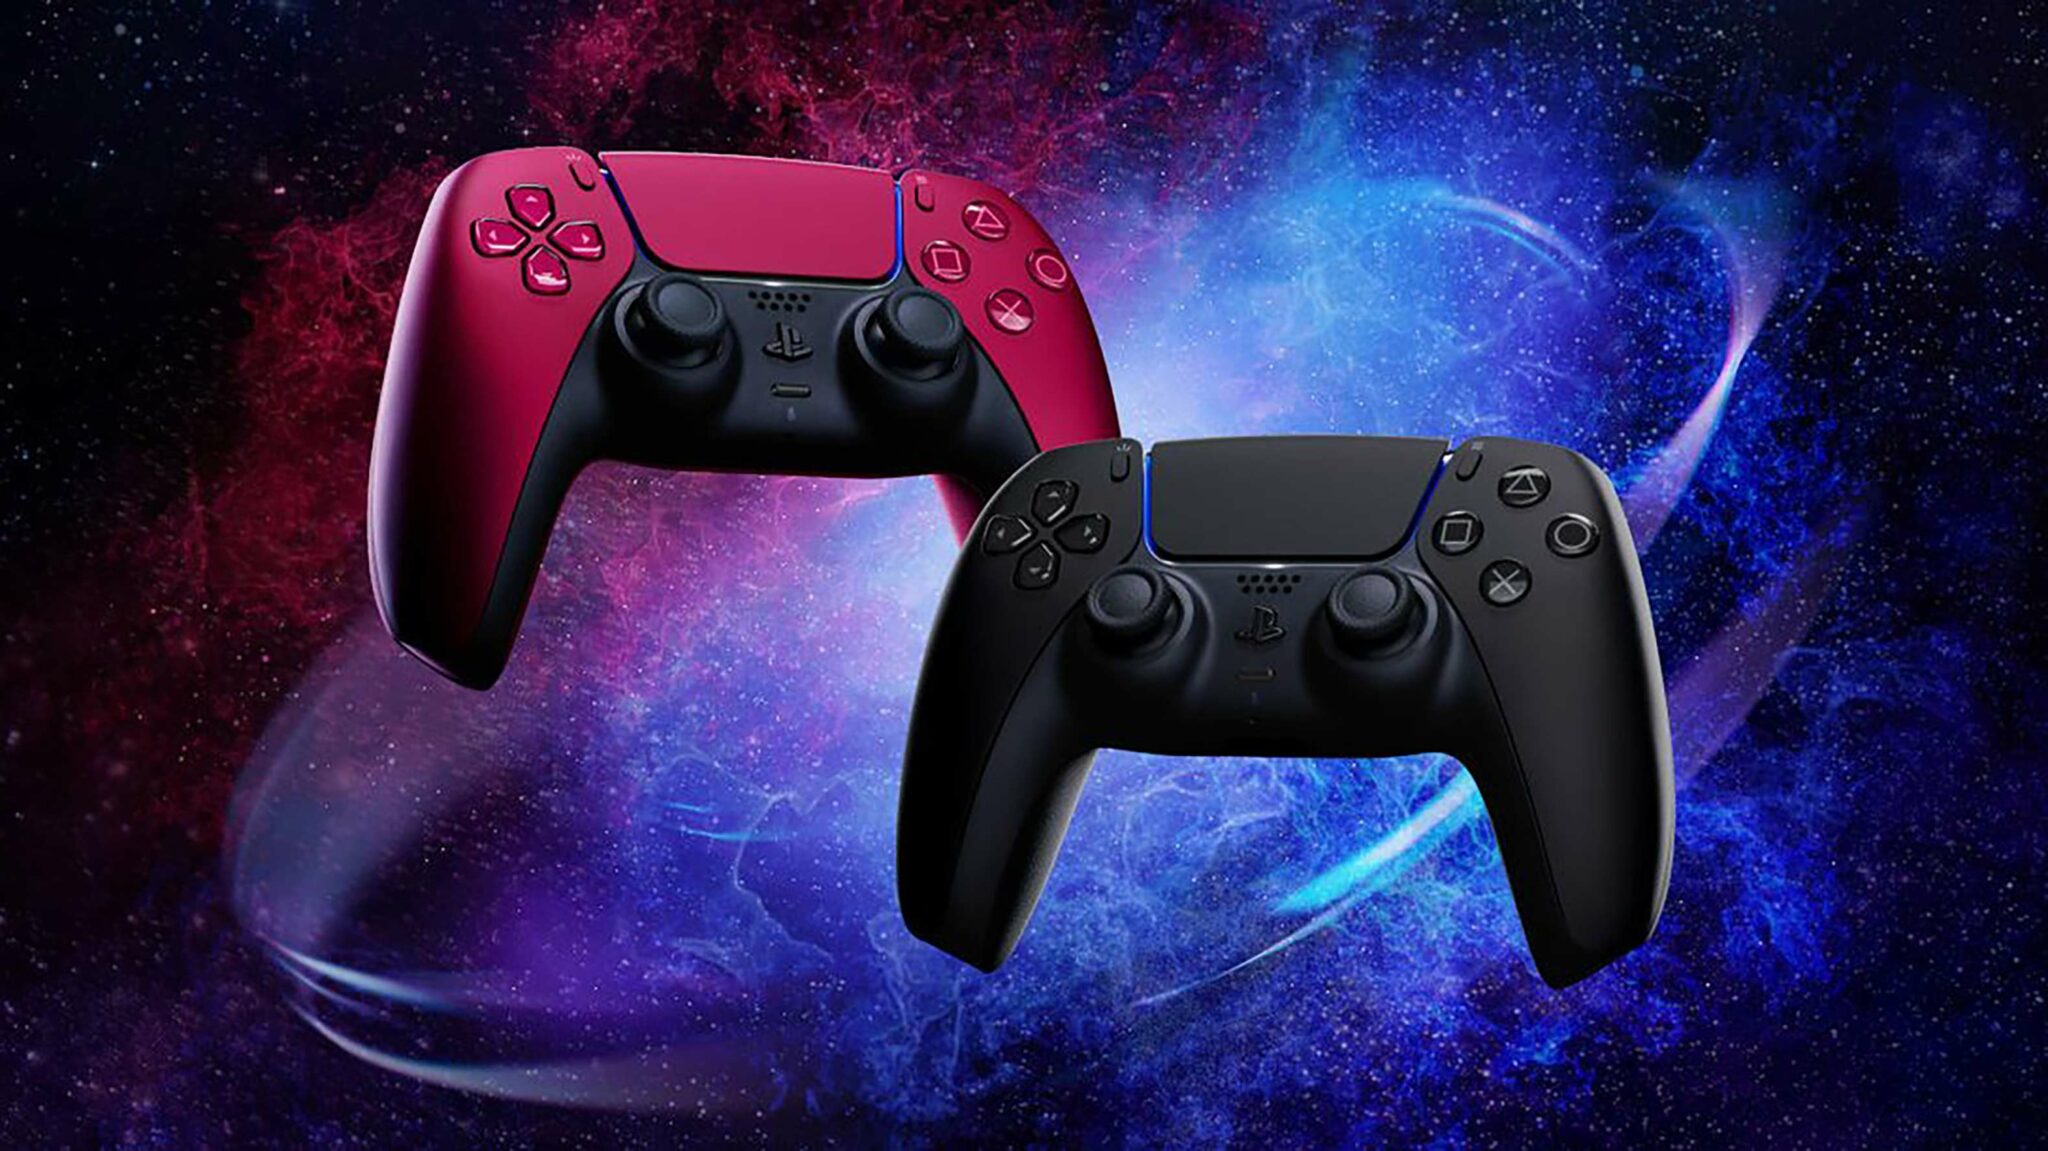 Best Buy has the PS5 DualSense wireless controller available for